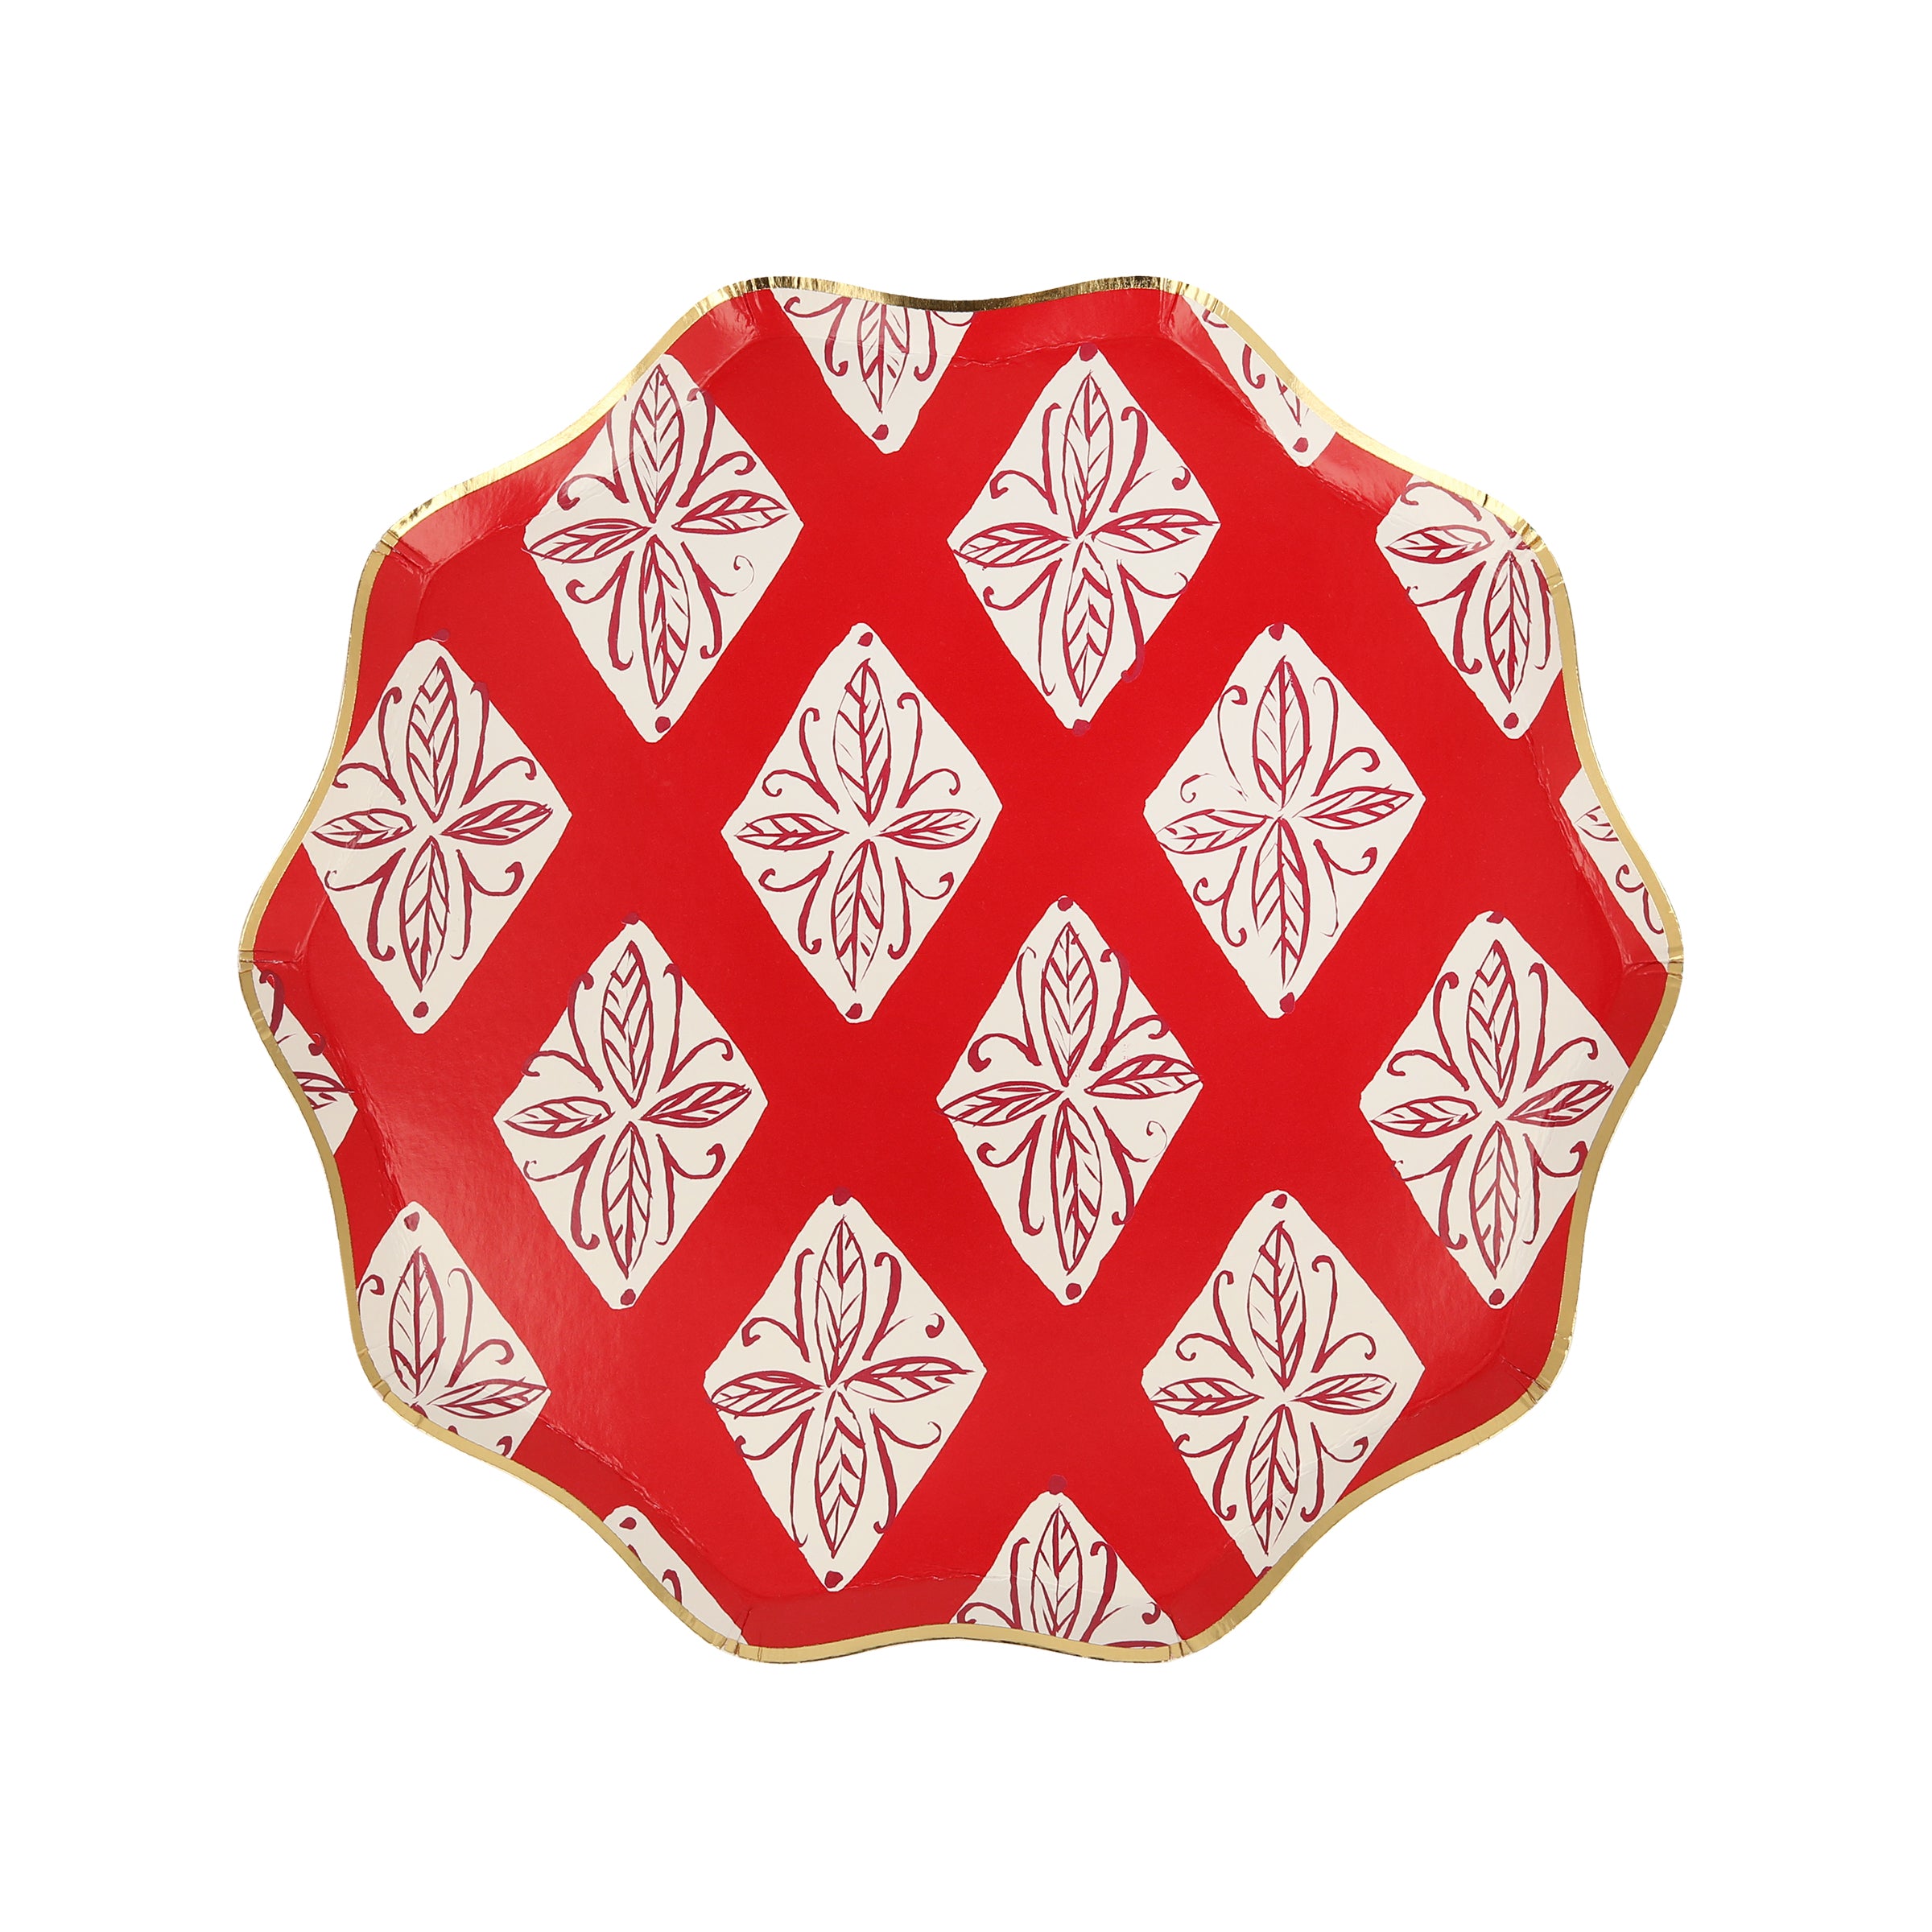 Our party plates, with their vintage plate design, are perfect to add to your Christmas party supplies.